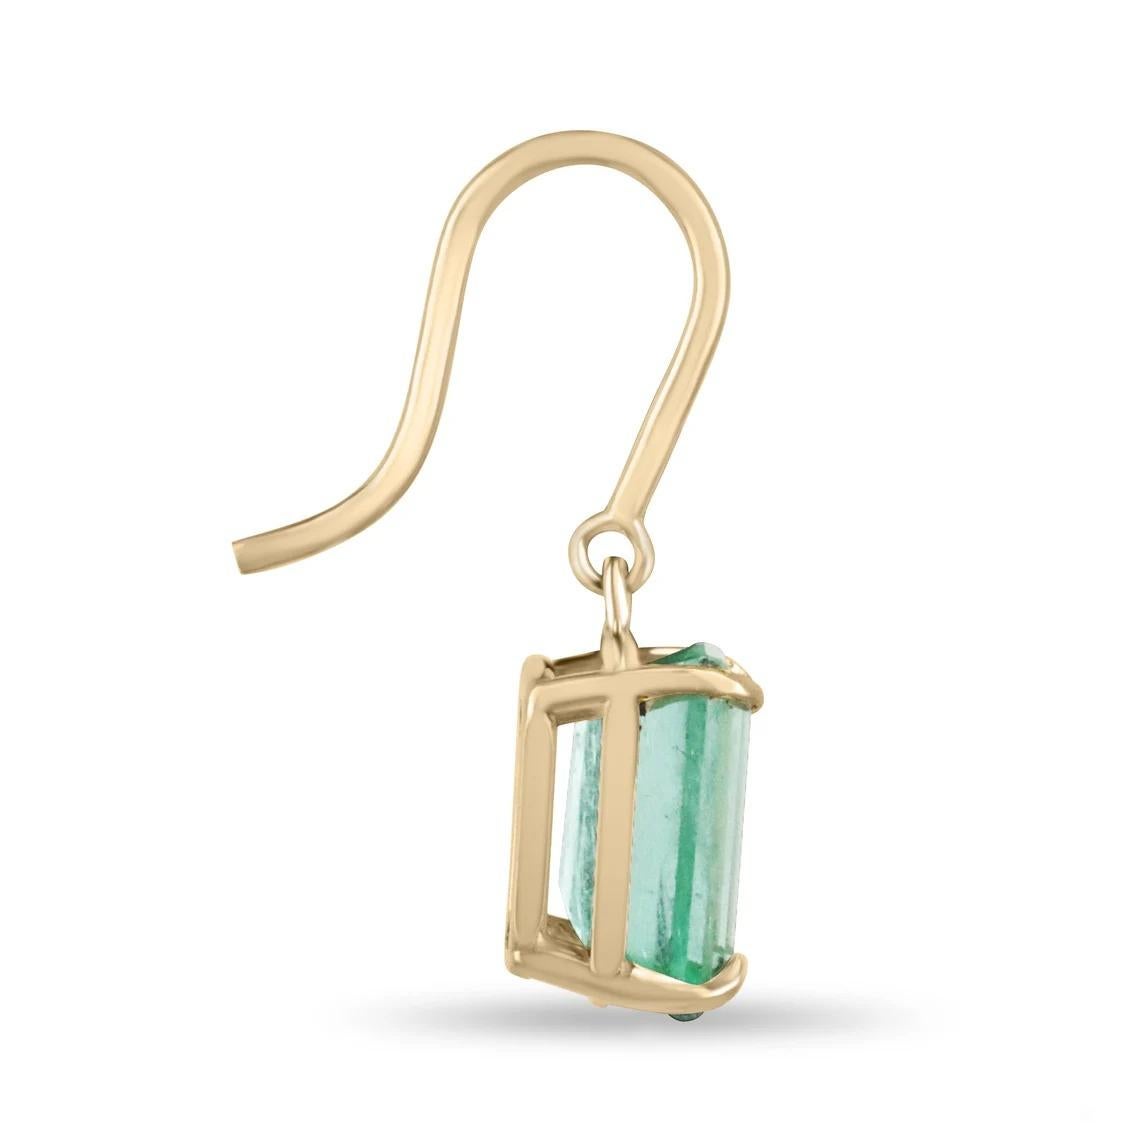 A simple pair of emerald cut-emerald lever back earrings made in 14K yellow gold. The chic pair of lever-back earrings feature green, natural Emeralds. The emeralds have beautiful eye clarity, displaying minor flaws that are normal in all